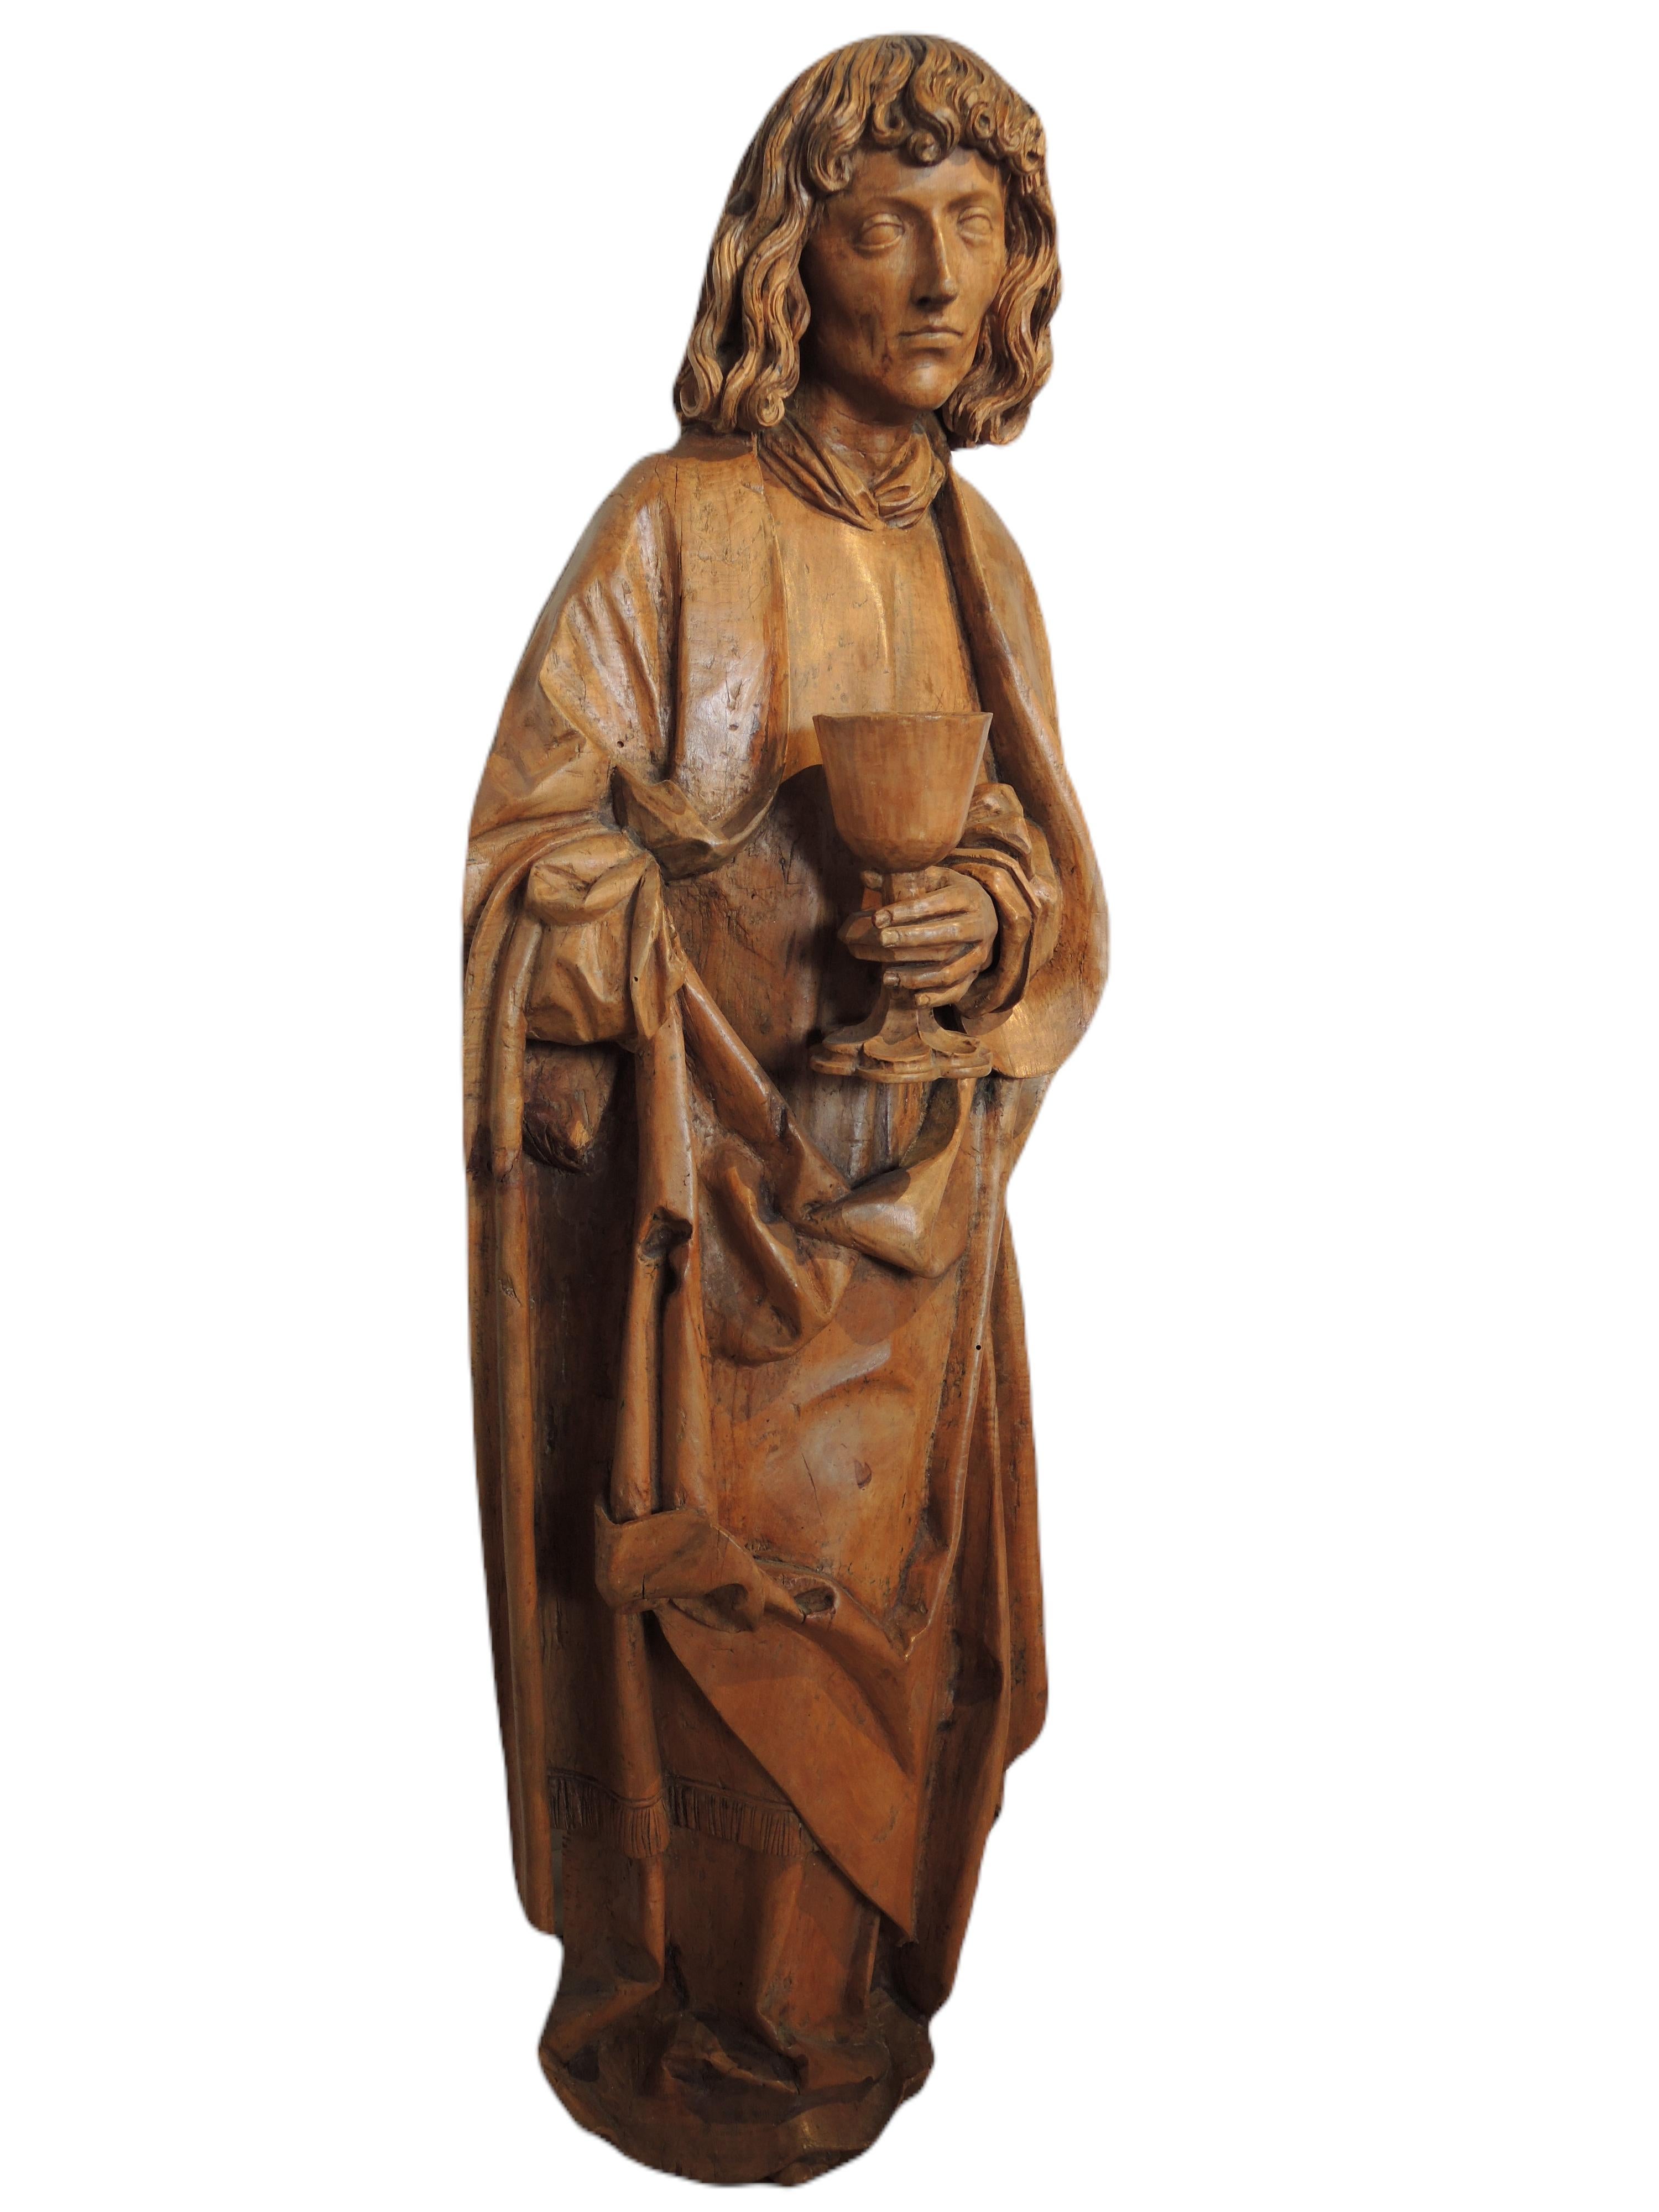 Large Saint John in sculpted linden, hollow back. South Germany, workshop of Niklaus Weckmann in Ulm towards the end of the 15th century. Our Saint John presents all the characteristics of the style of the master of Ulm: the expressive face with